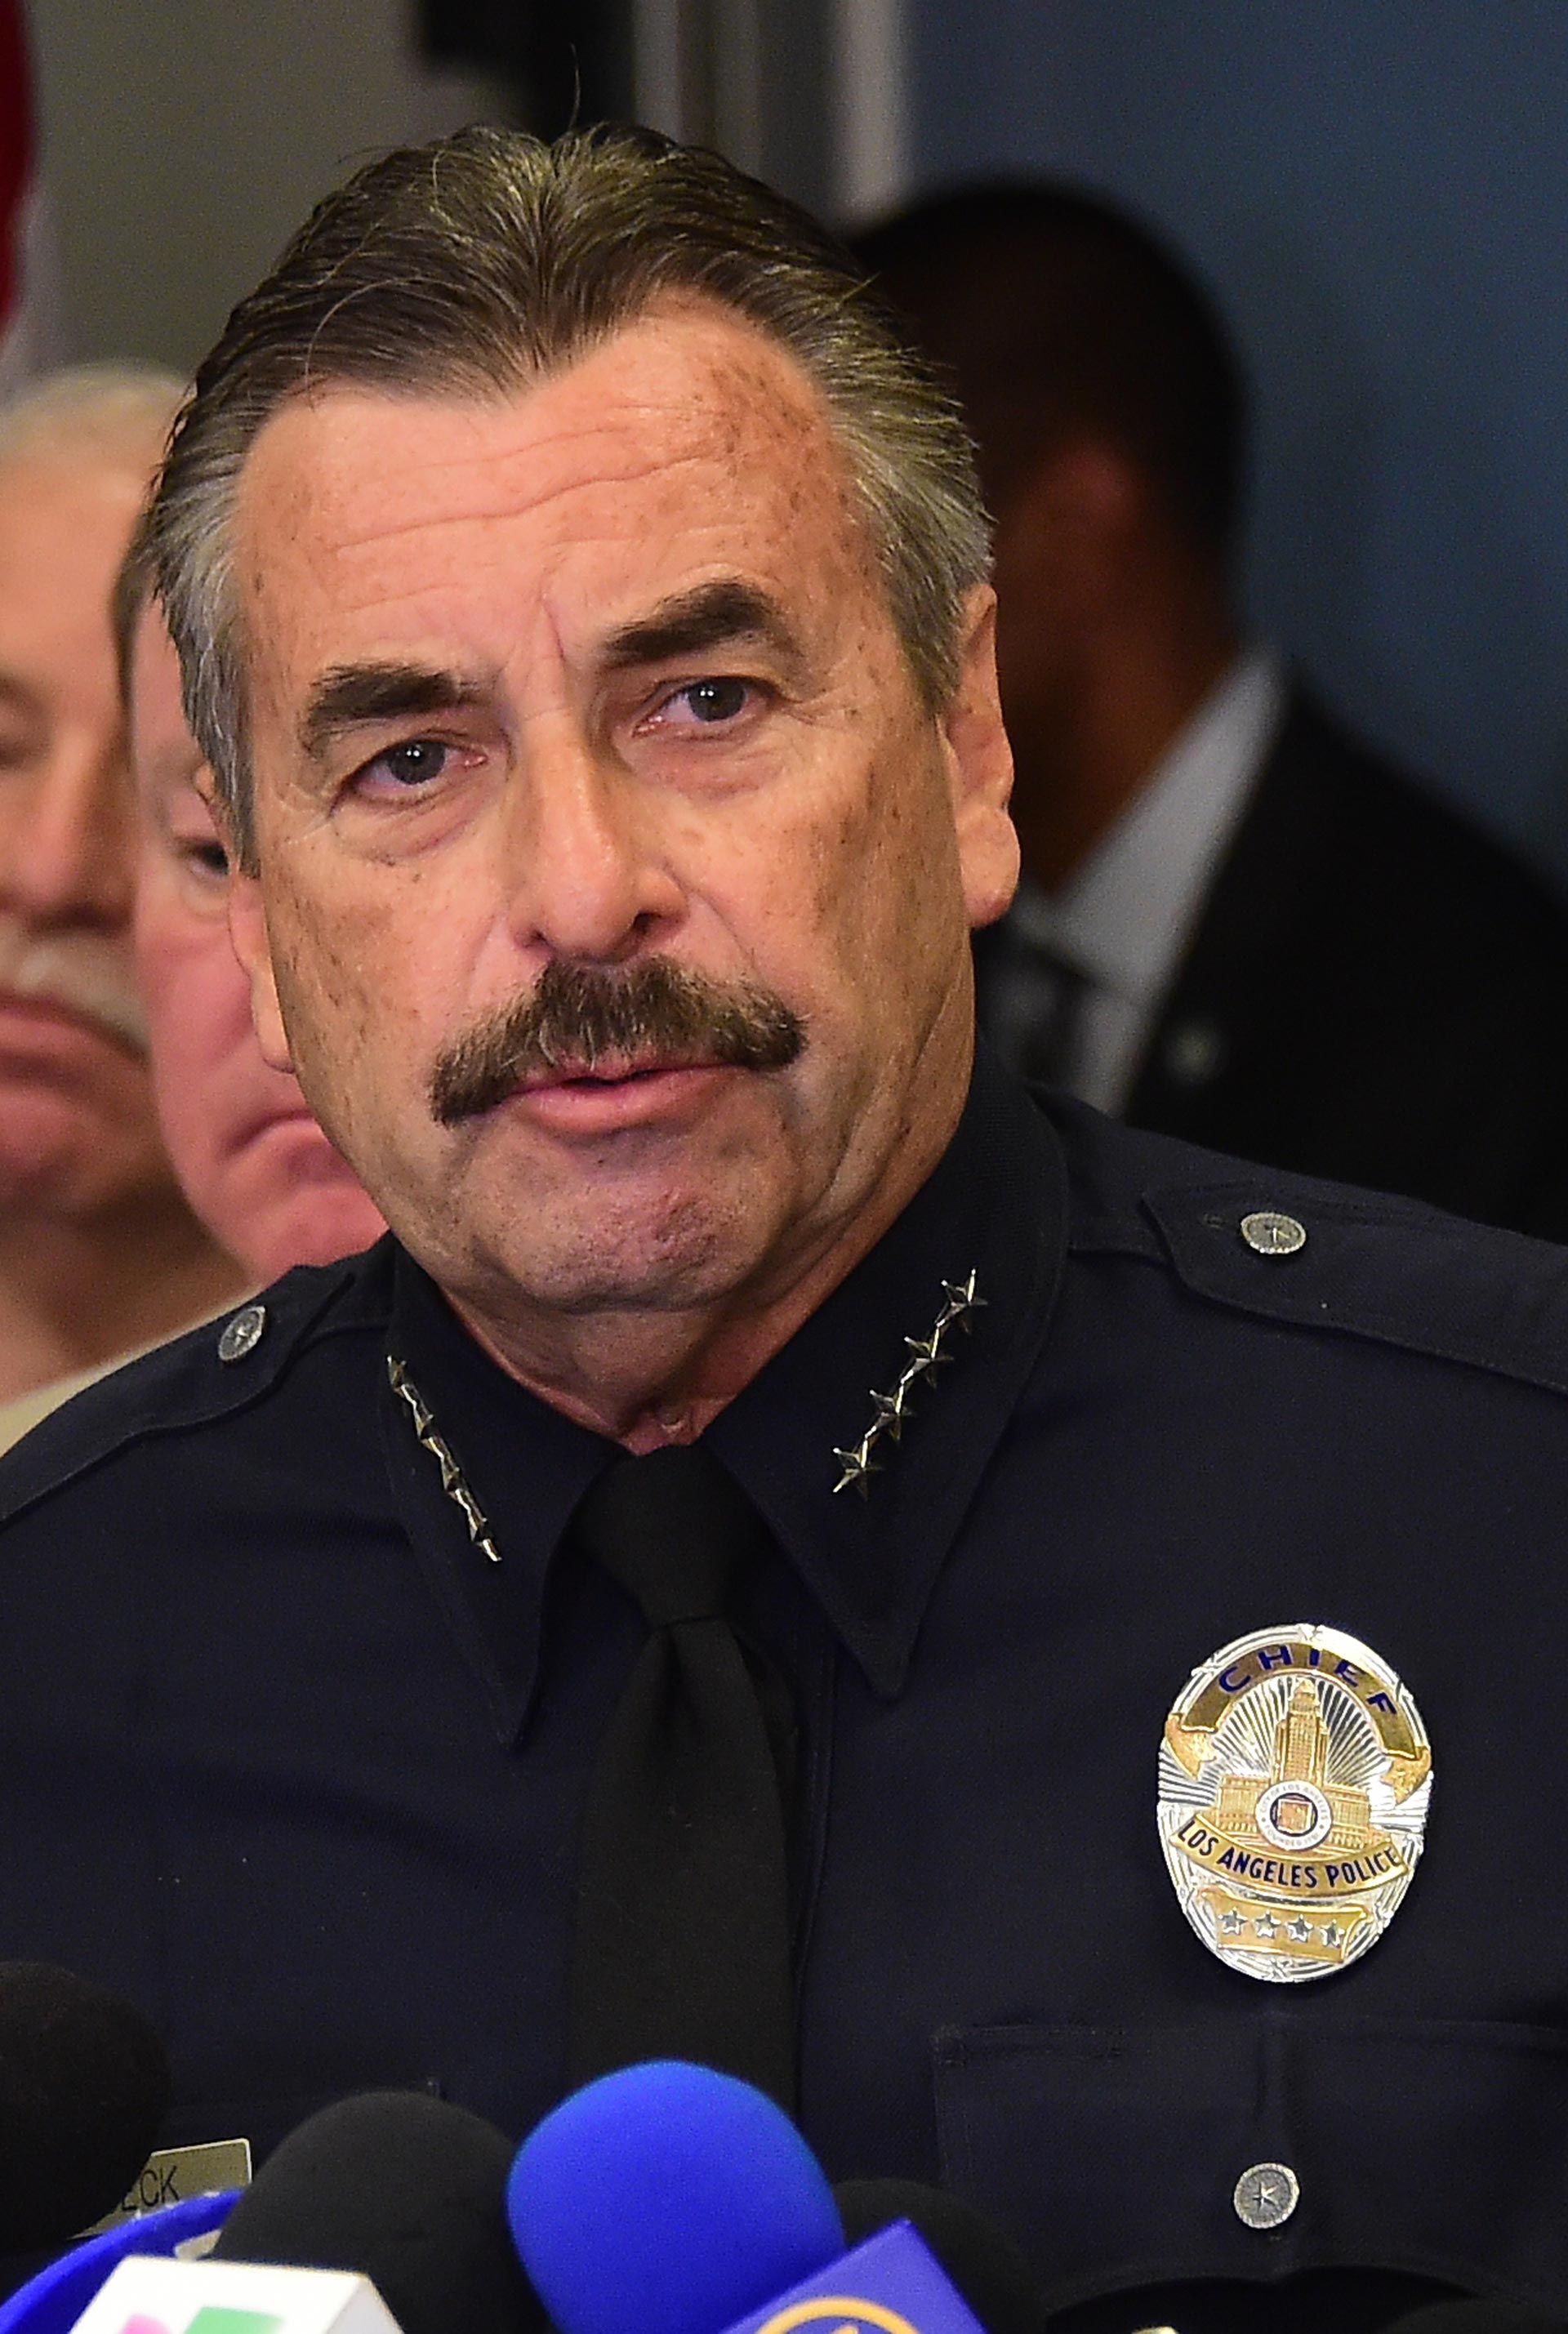 Los Angeles police chief Charlie Beck addresses the media at Los Angeles Unified School District headquarters on Dec. 15, 2015.